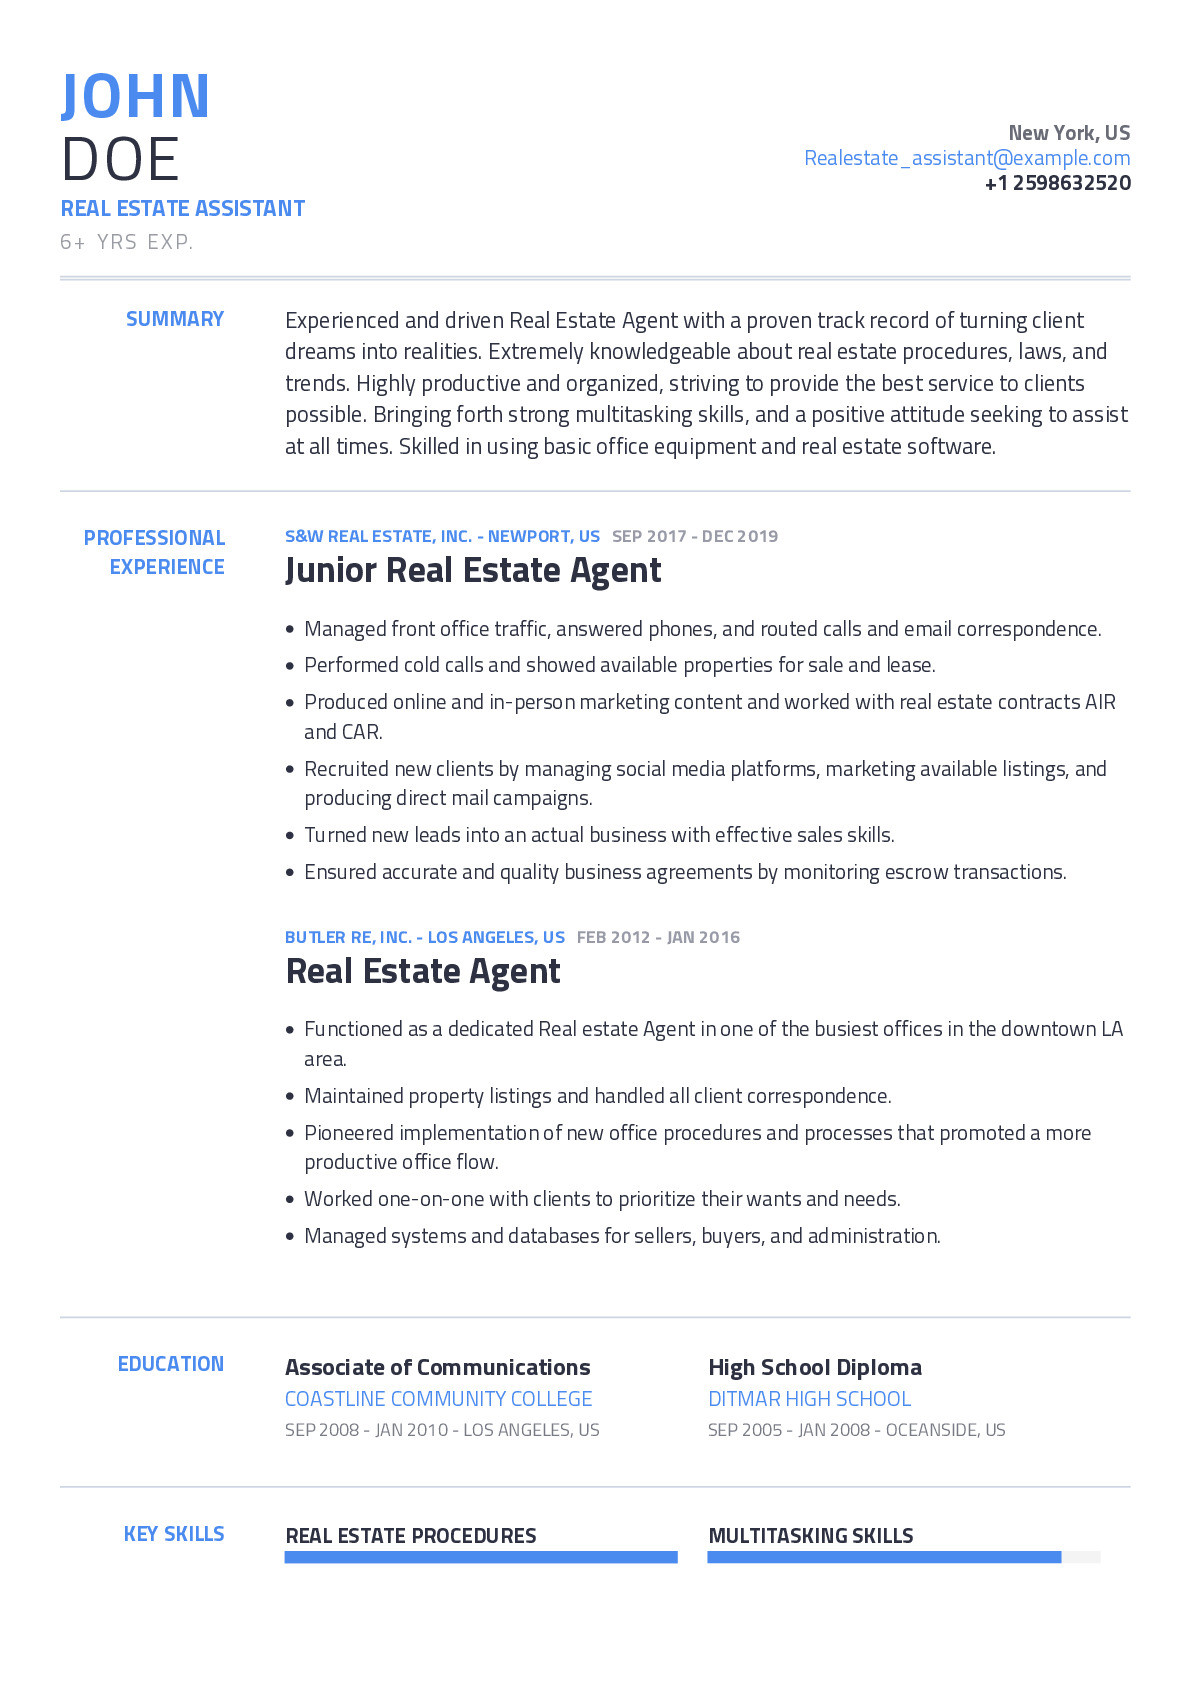 Sample Resume Objective Real Estate Agent Real Estate assistant Resume Example with Content Sample Craftmycv